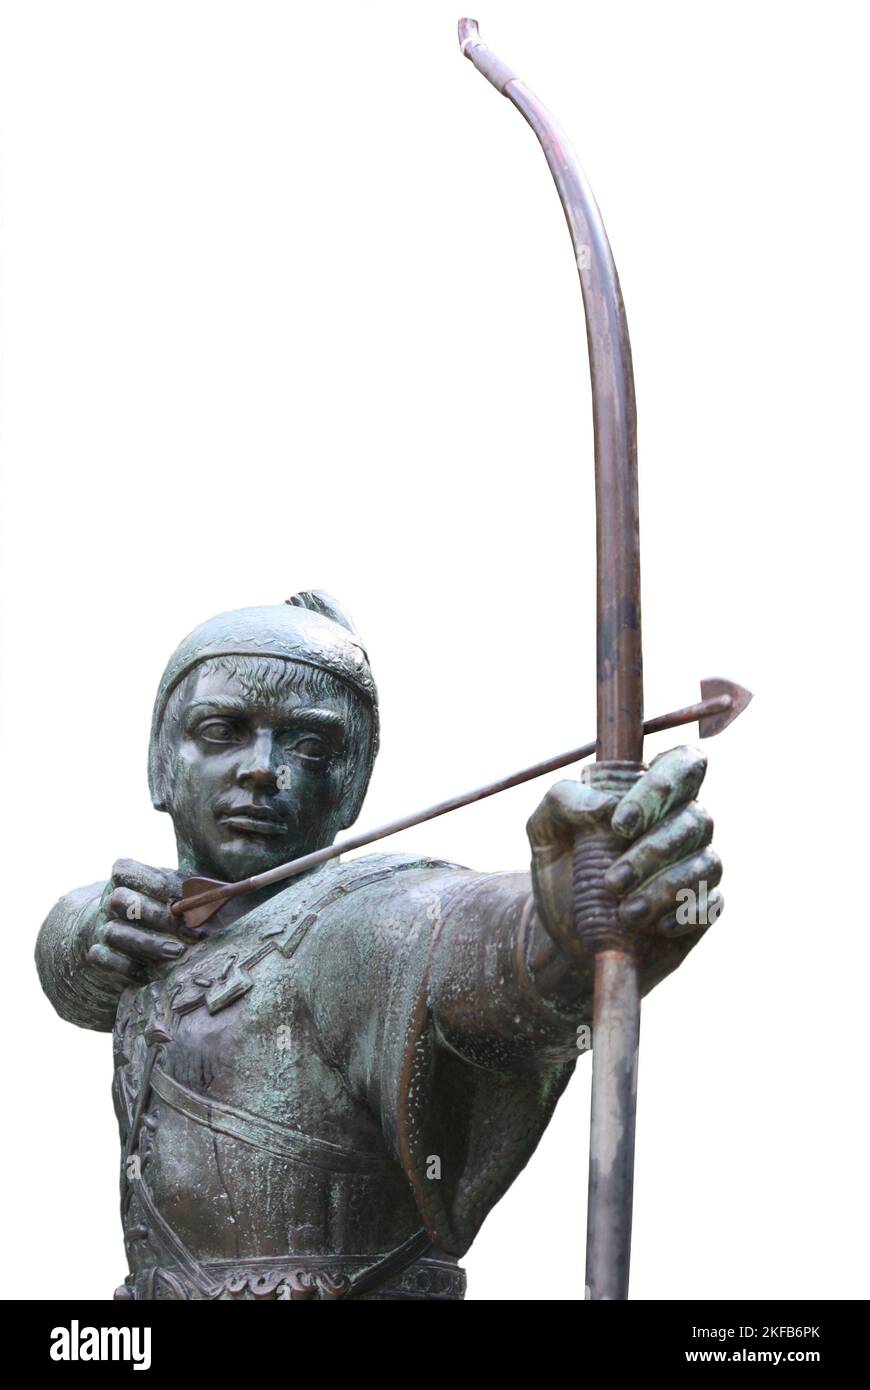 An Ancient Statue of the Outlaw Robin Hood. Stock Photo